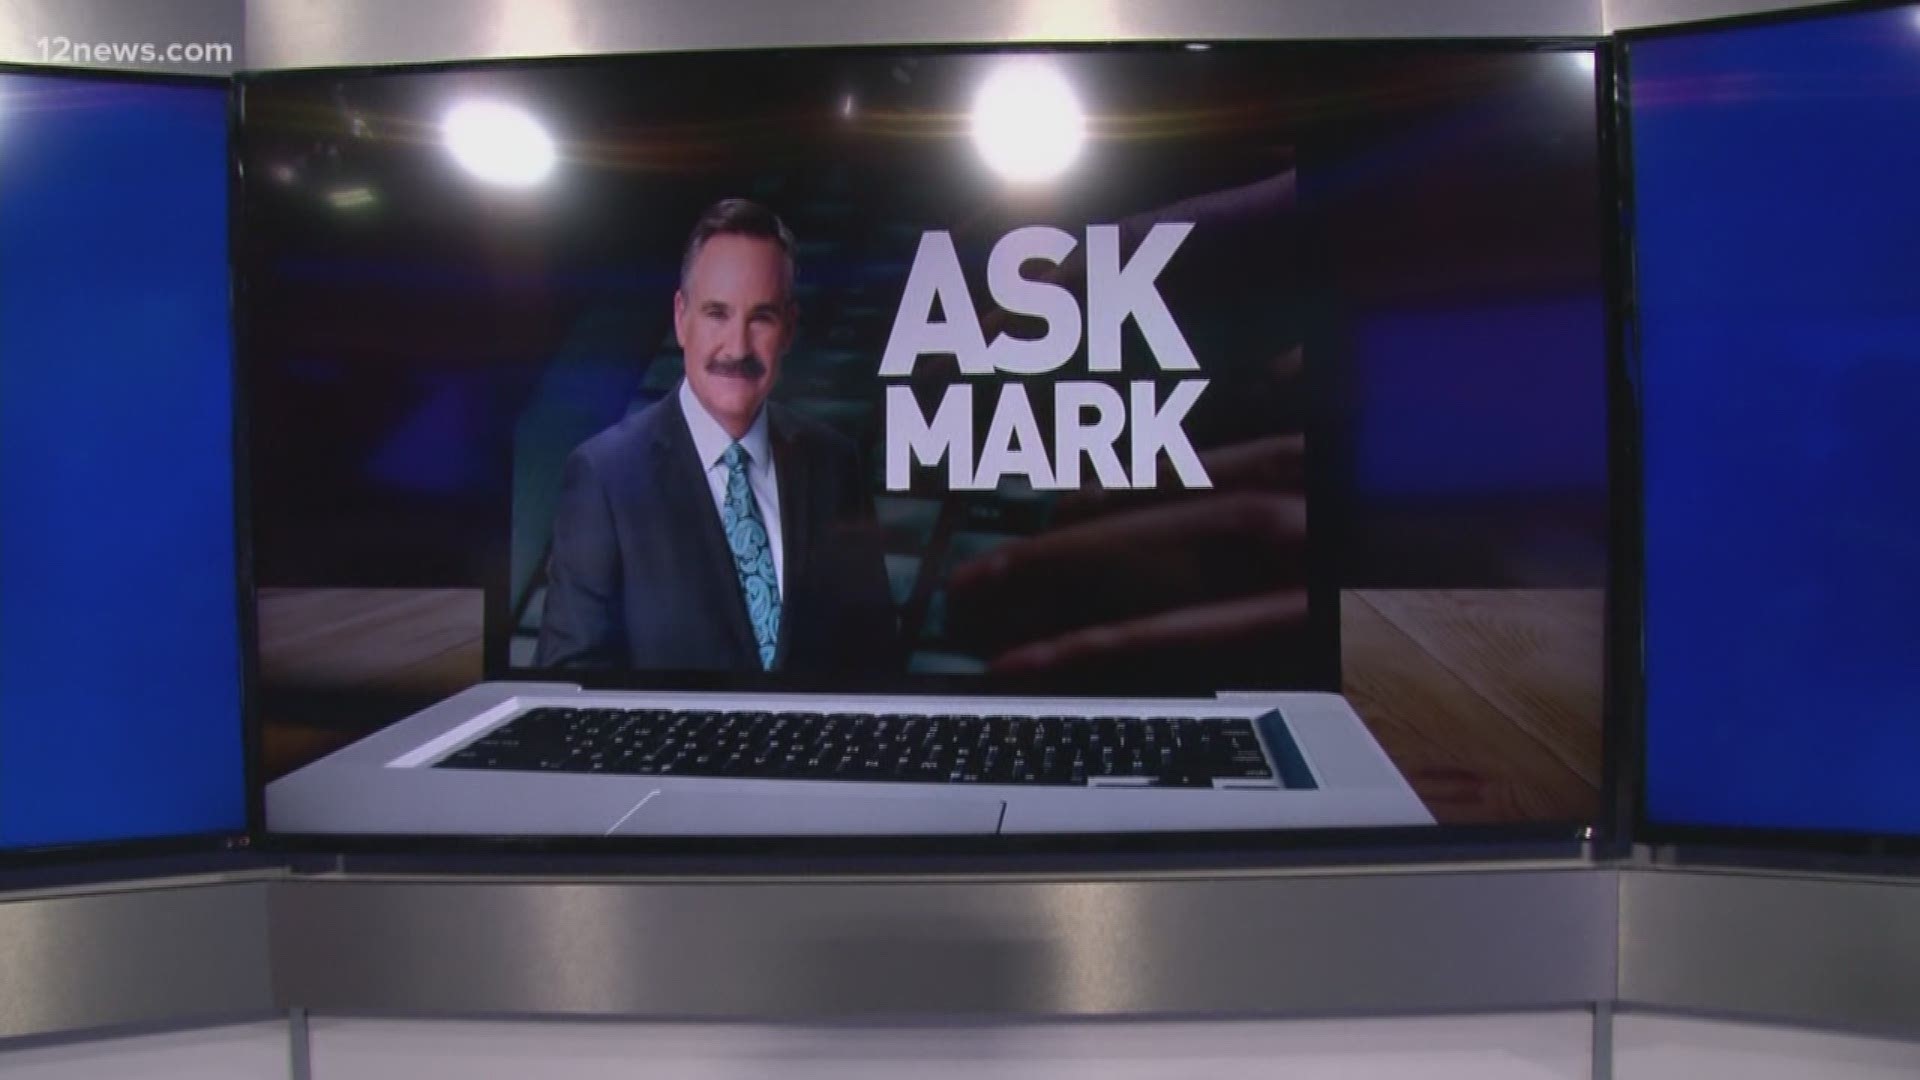 12 News is the official home of the Waste Management Phoenix Open, and with it being a couple weeks away one viewer wanted to know what are the best and worst parts of Mark's golf game. Check out his answer.